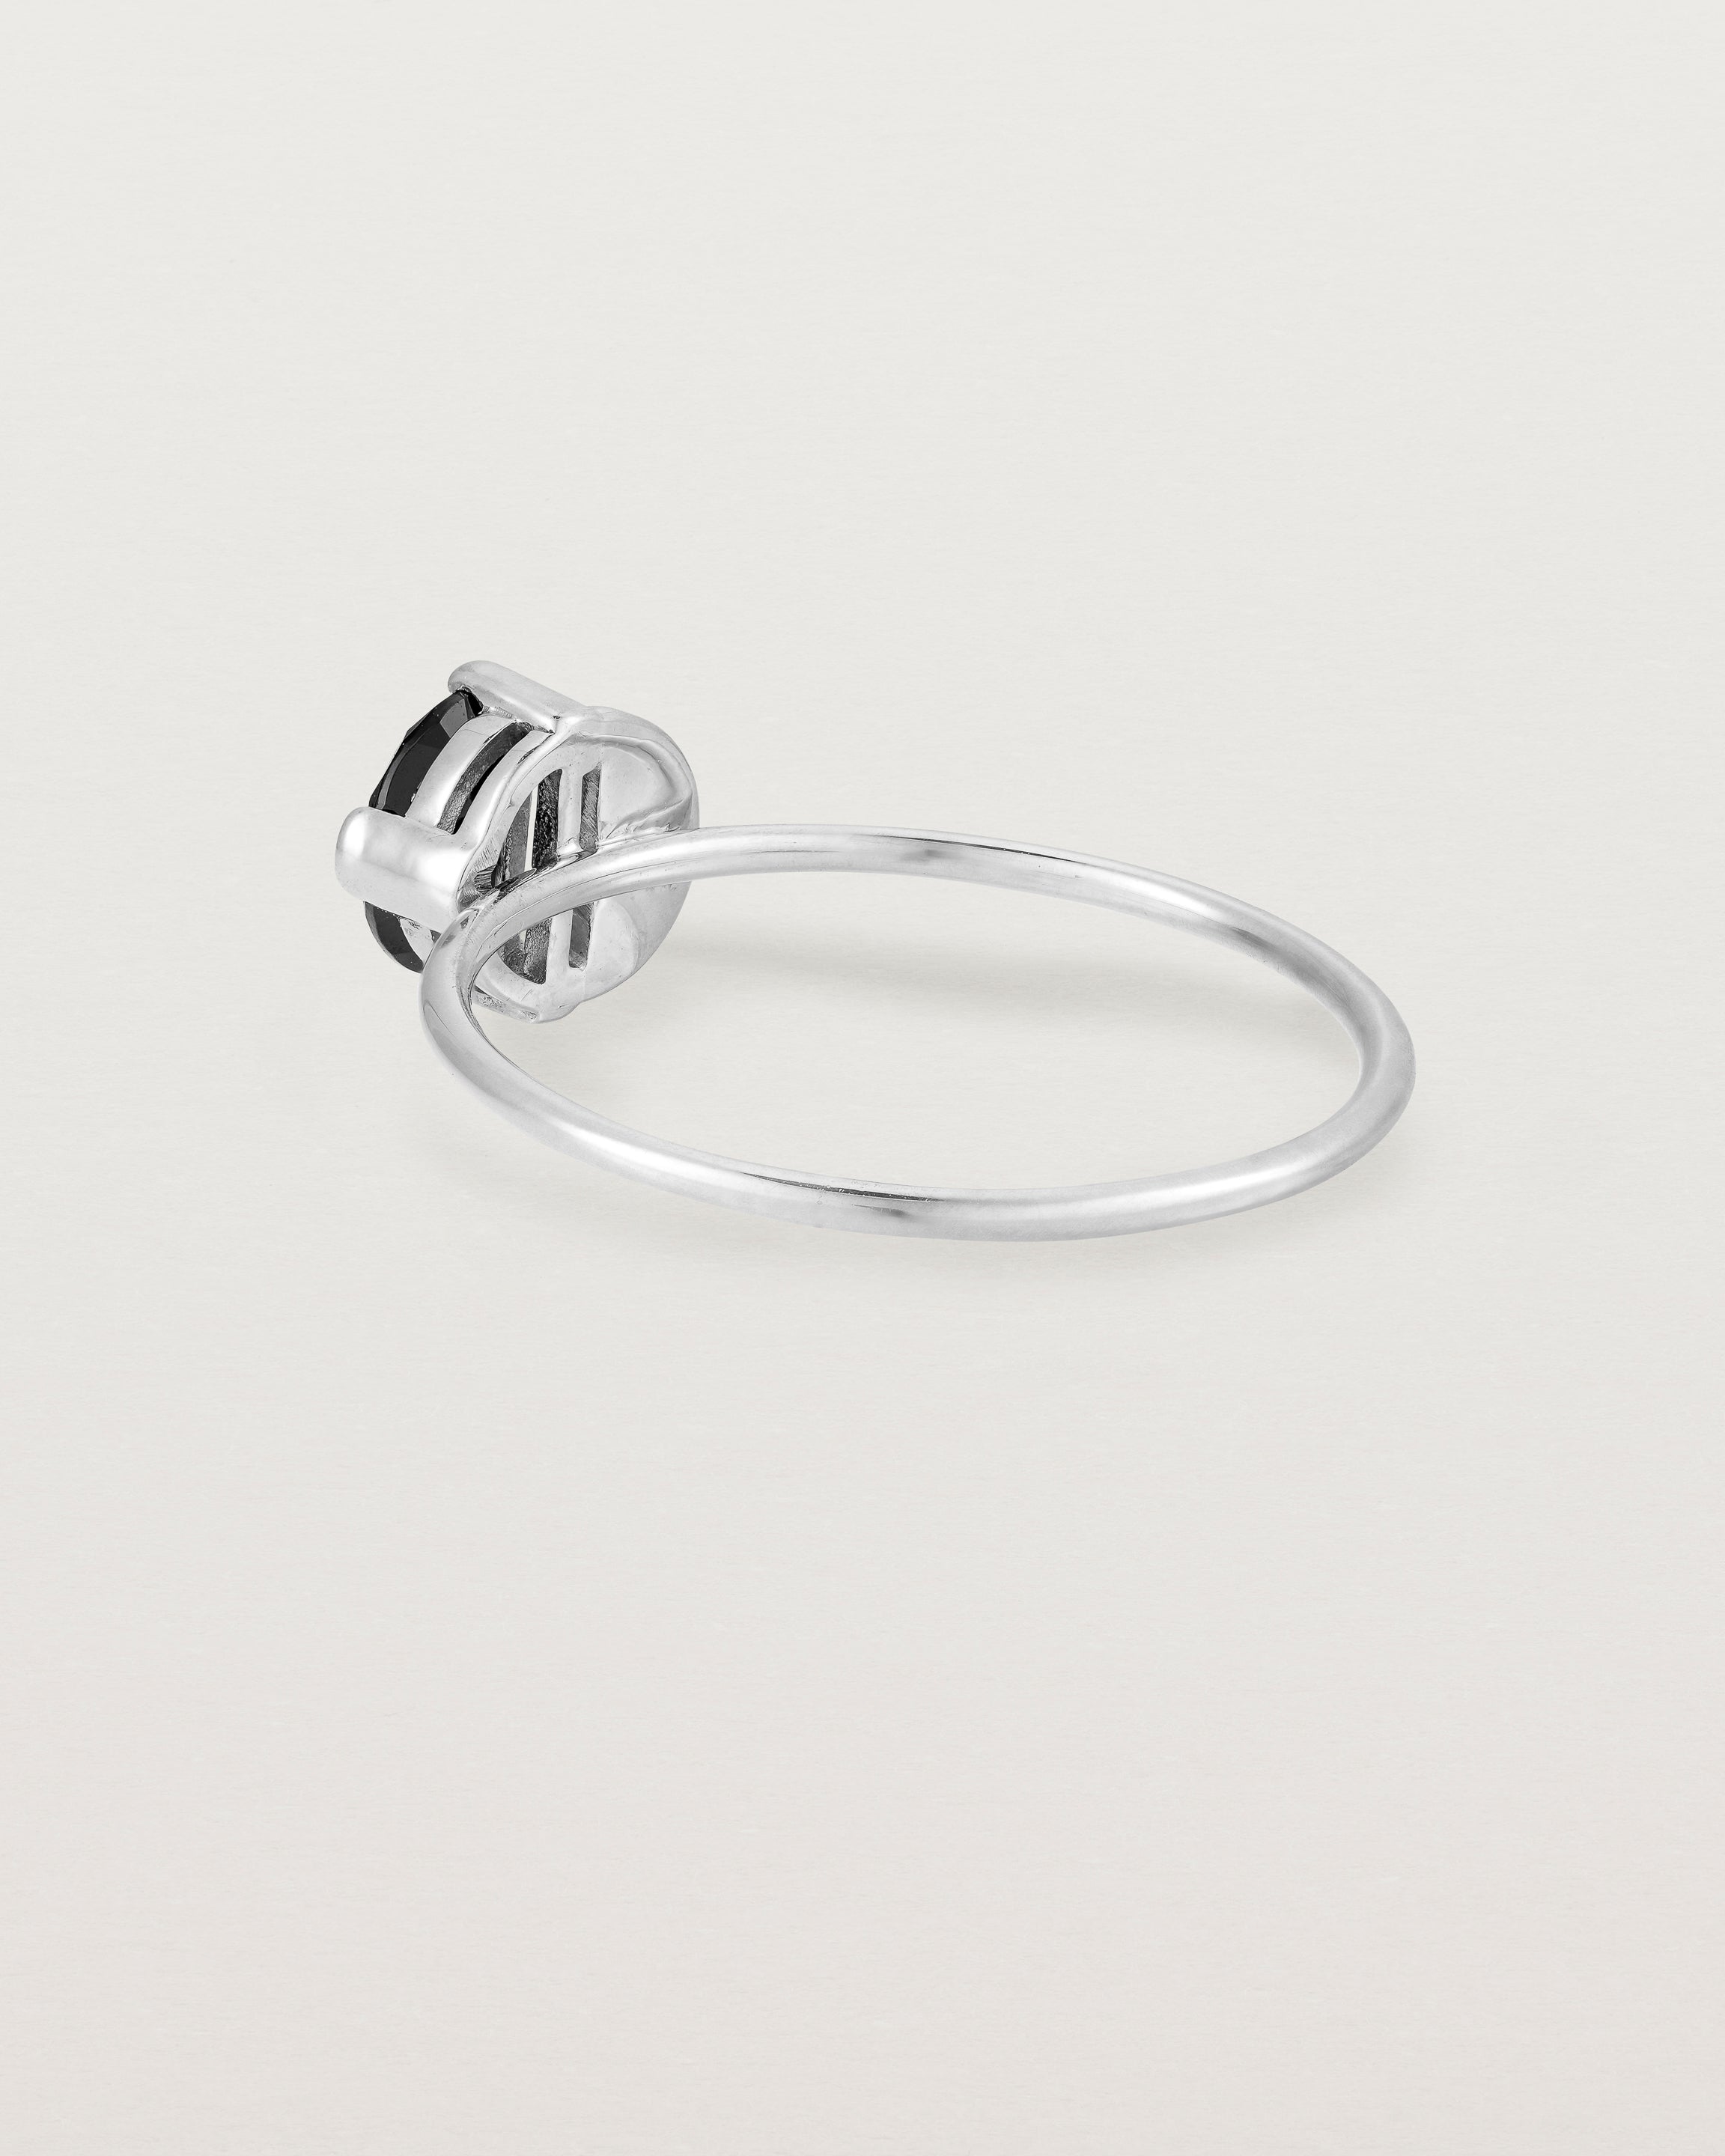 Back view of the Jia Stone Ring | Black Spinel in Sterling Silver.